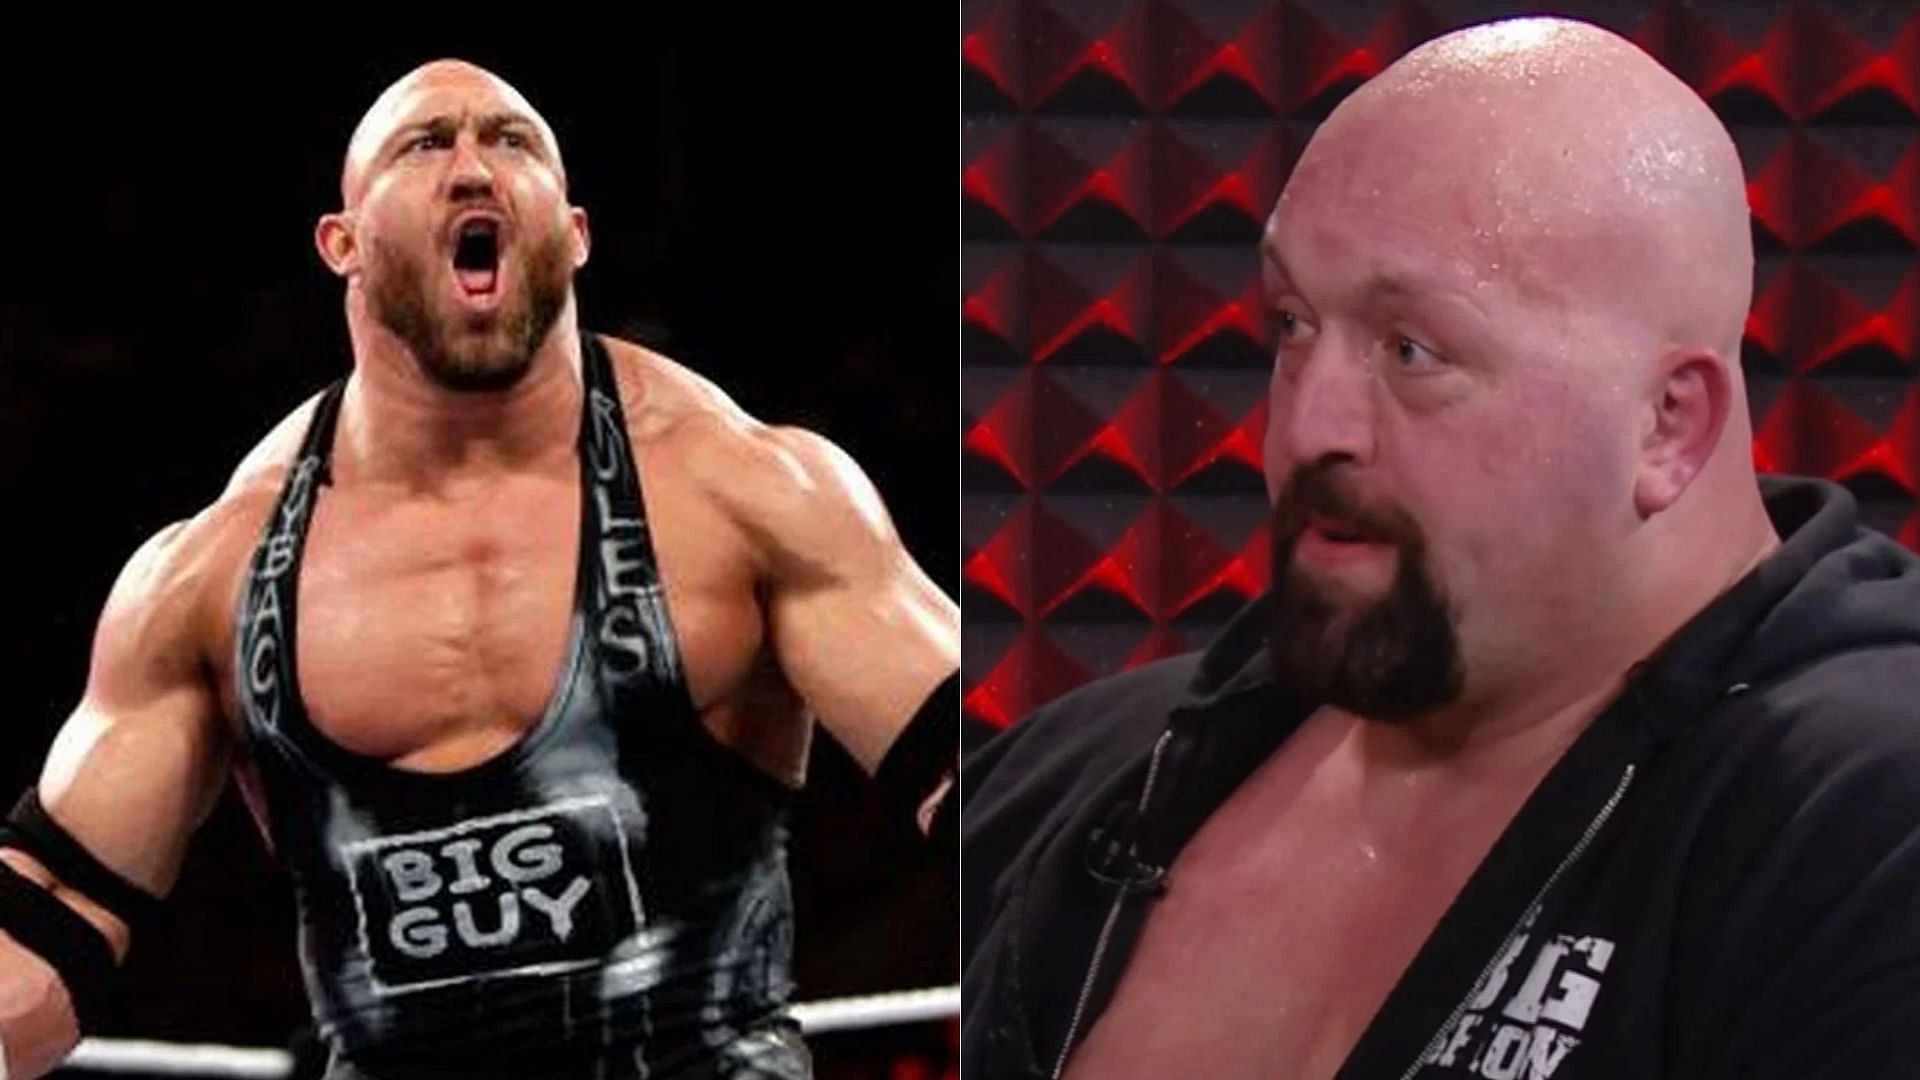 Ryback (left); The Big Show (right)